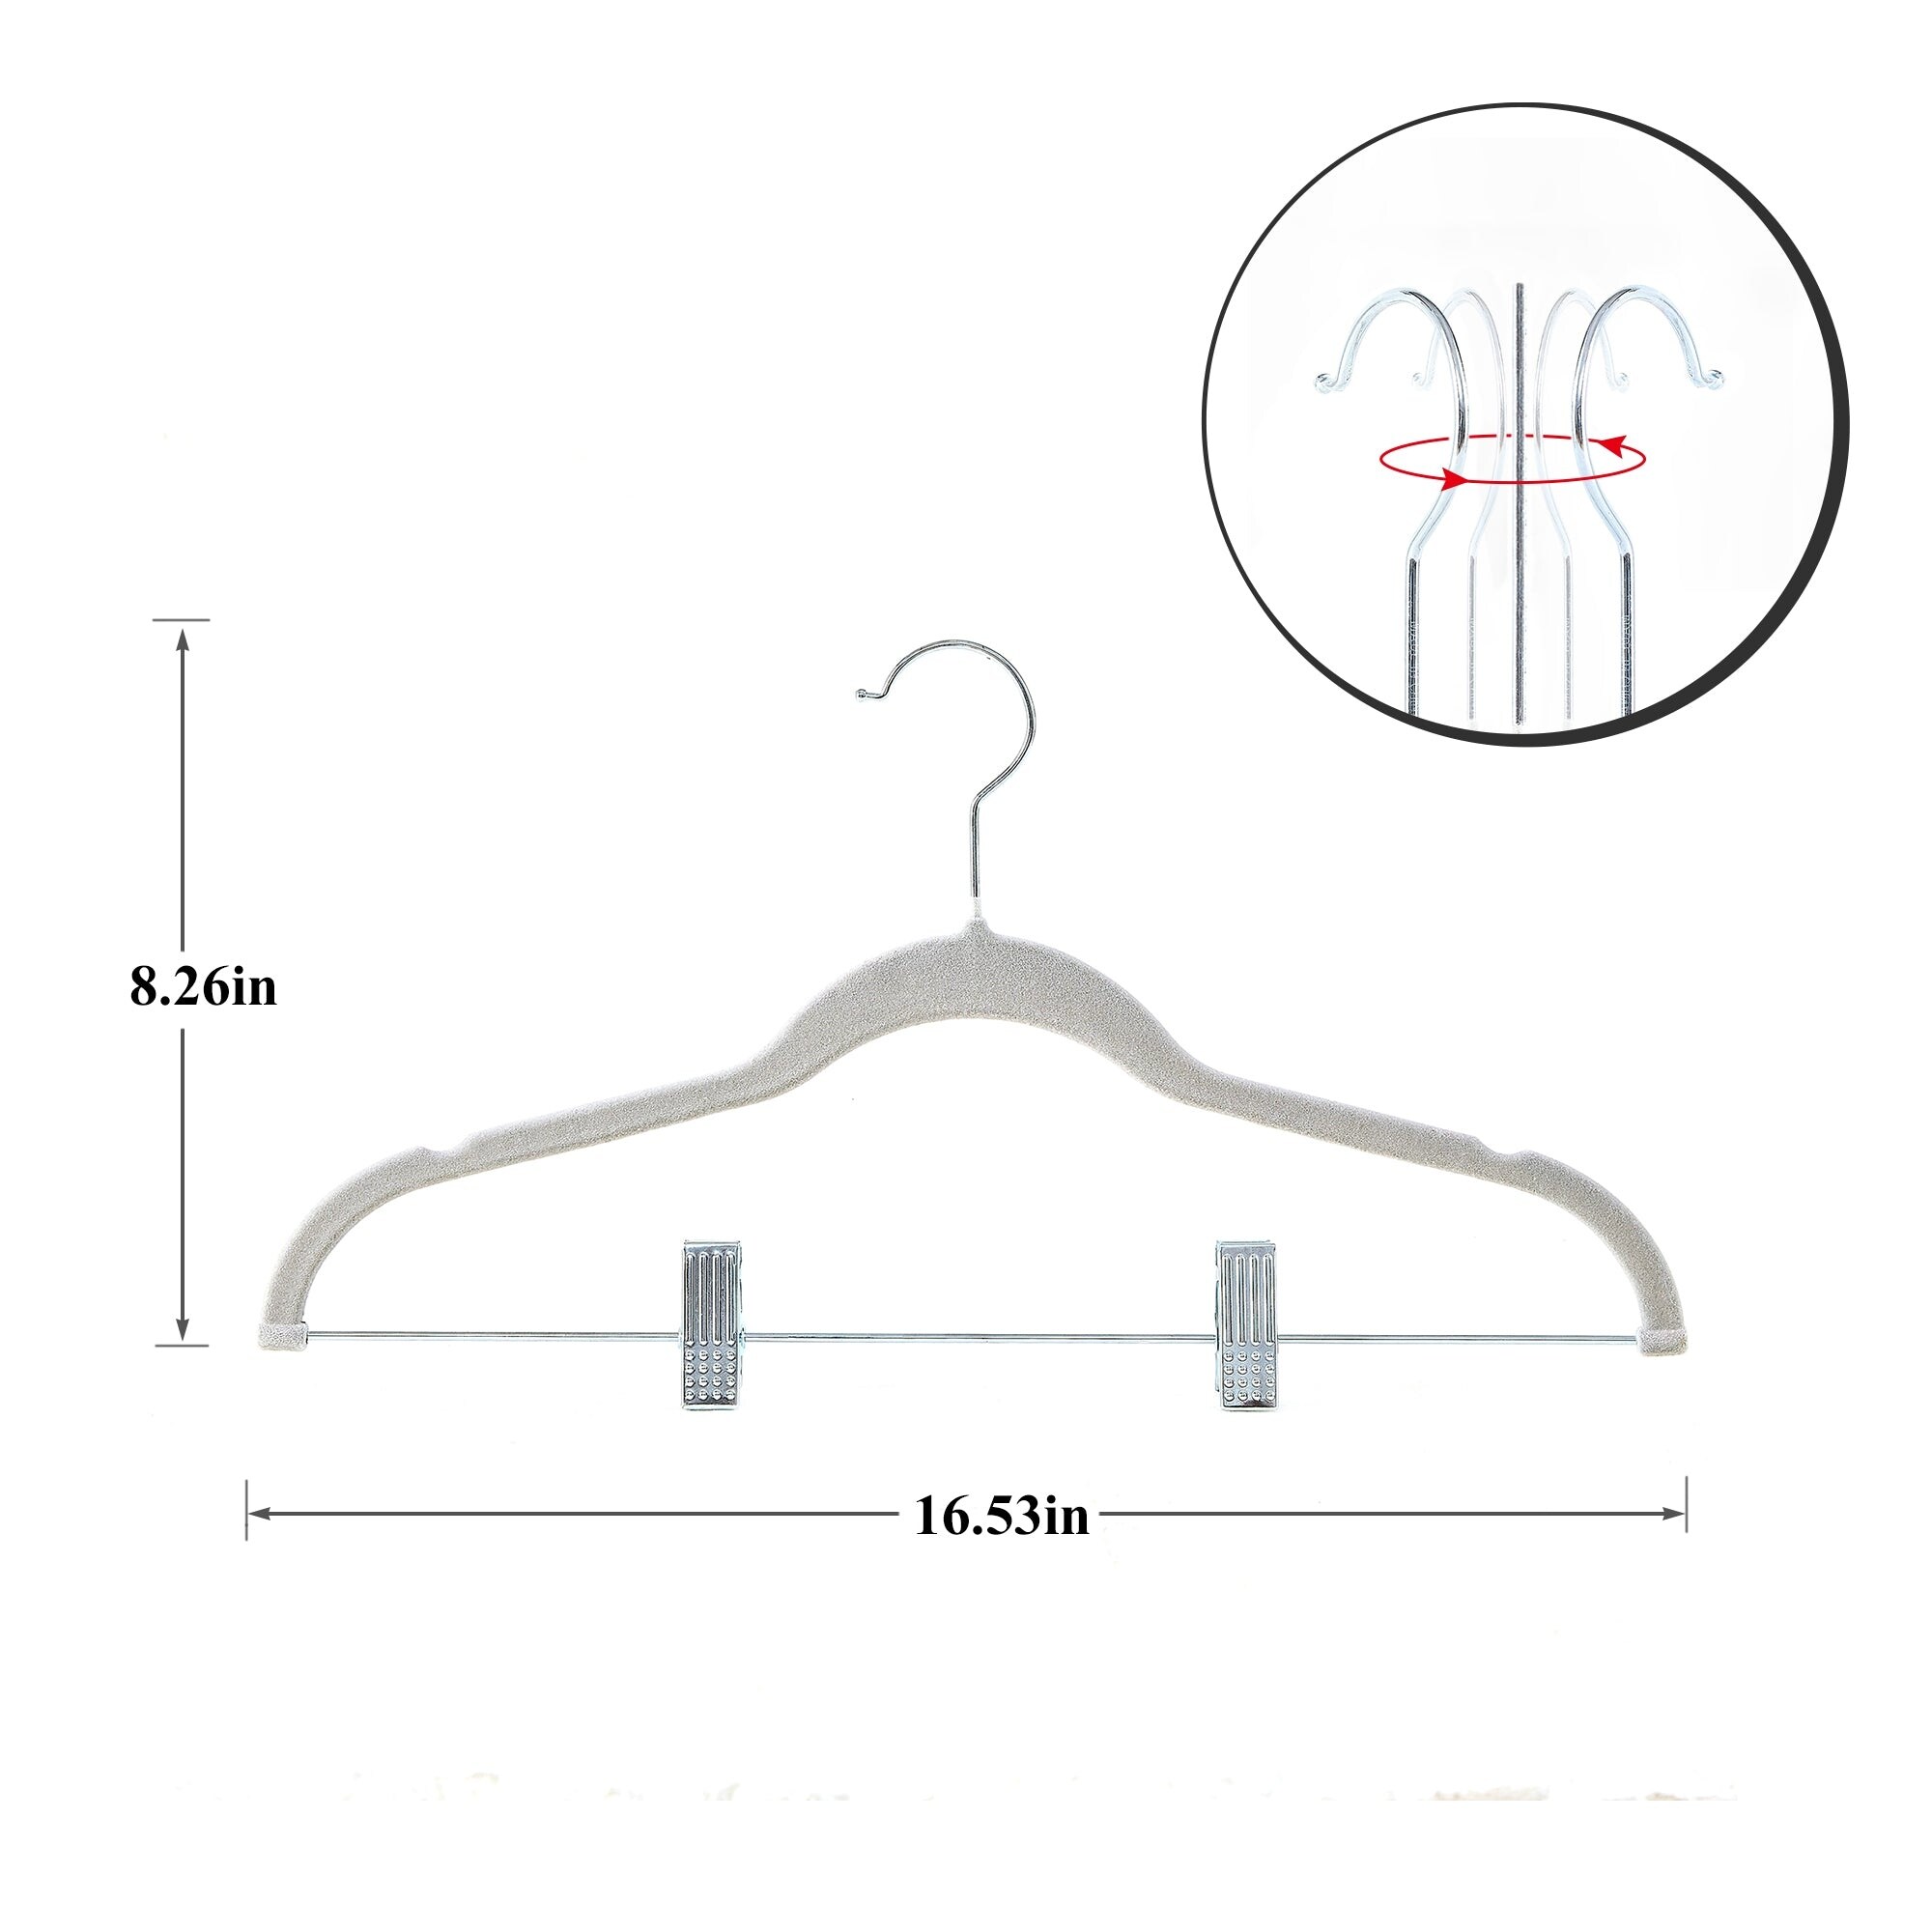 https://ak1.ostkcdn.com/images/products/is/images/direct/33aeab26a2aebaa66d509fb33af004ad2a3bd646/Javlergo-20-Pack-Velvet-Clothes-Hangers%2C-16.5in-Heavy-Duty-Hangers-with-Adjustable-Clips%2C-Non-Slip%2C-Space-Saving.jpg